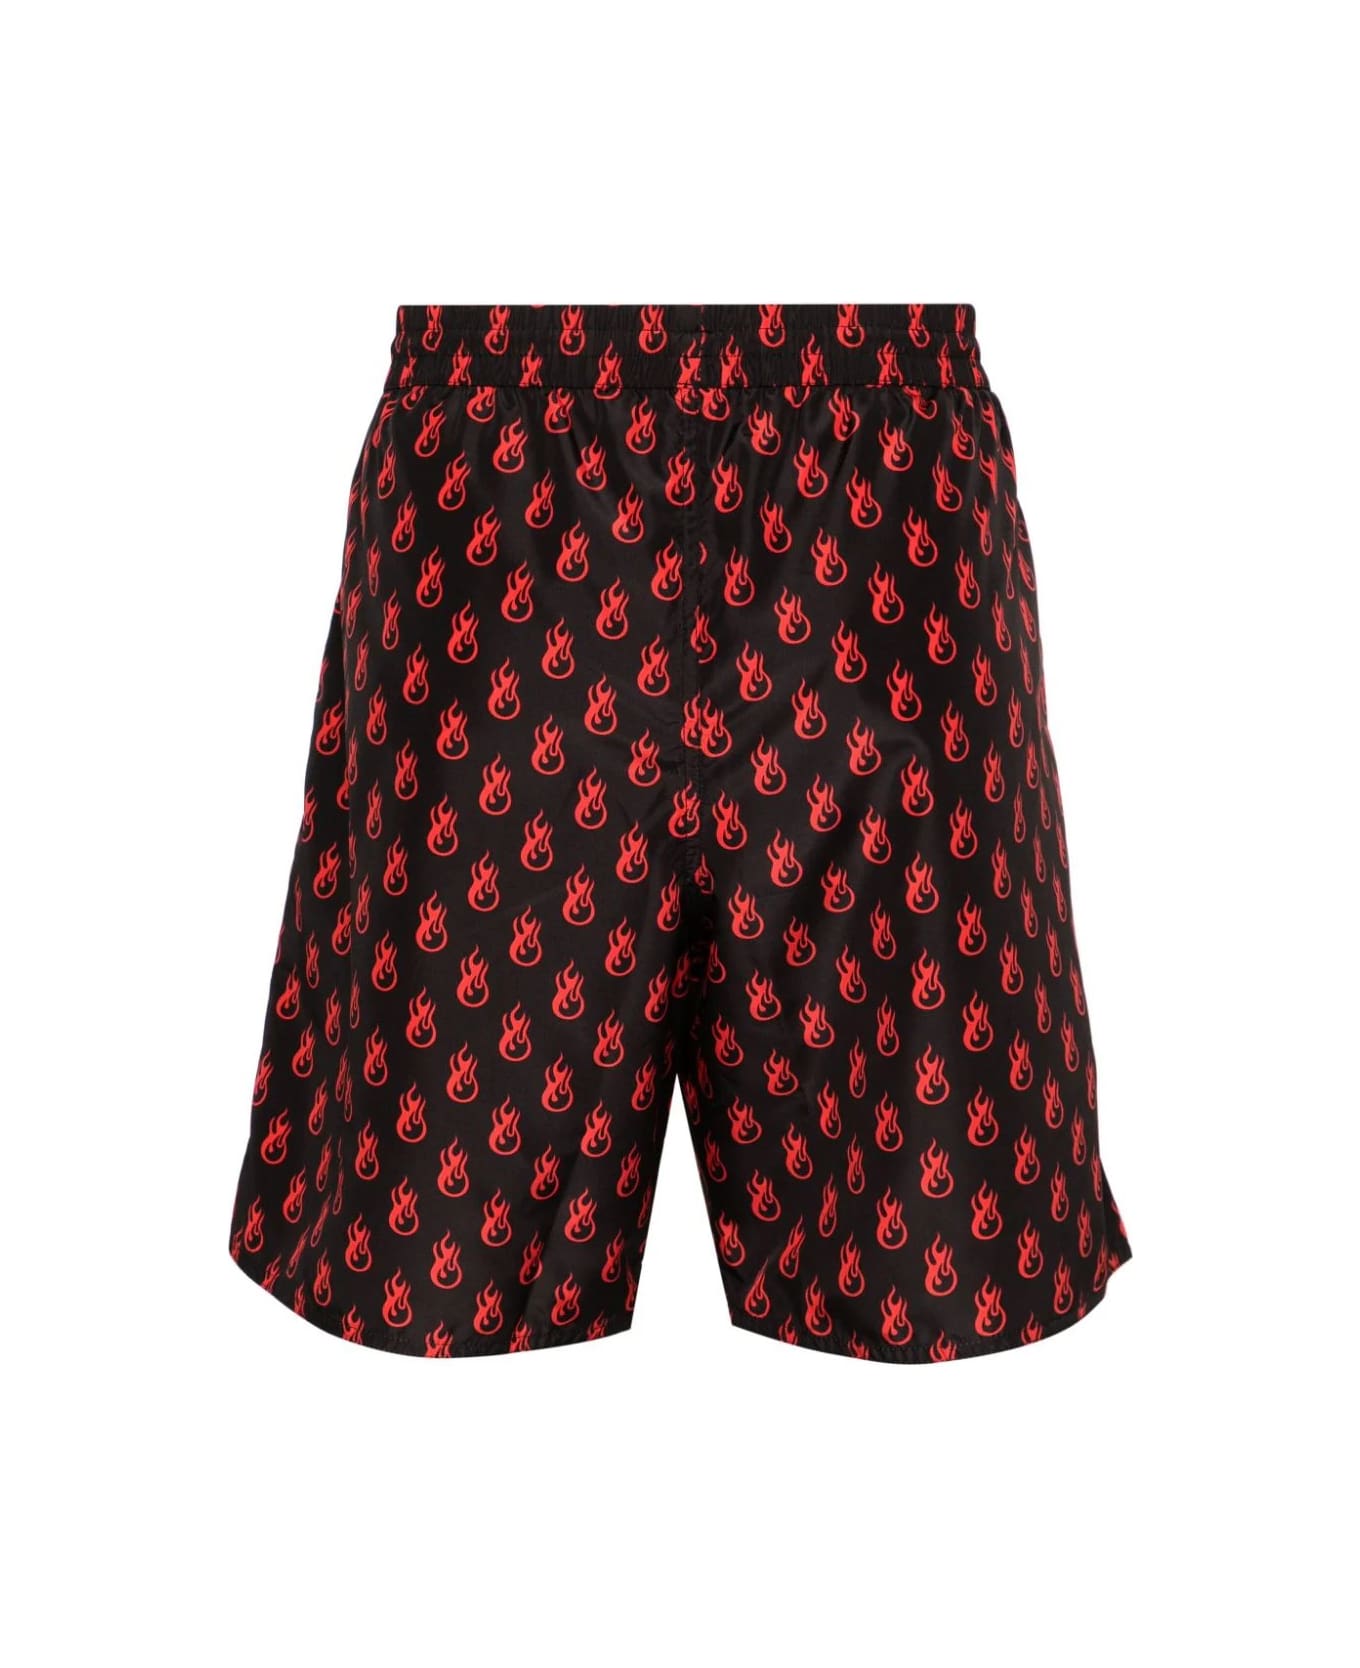 Vision of Super Black Swimwear With Red Flames Pattern - BLACK/RED スイムトランクス